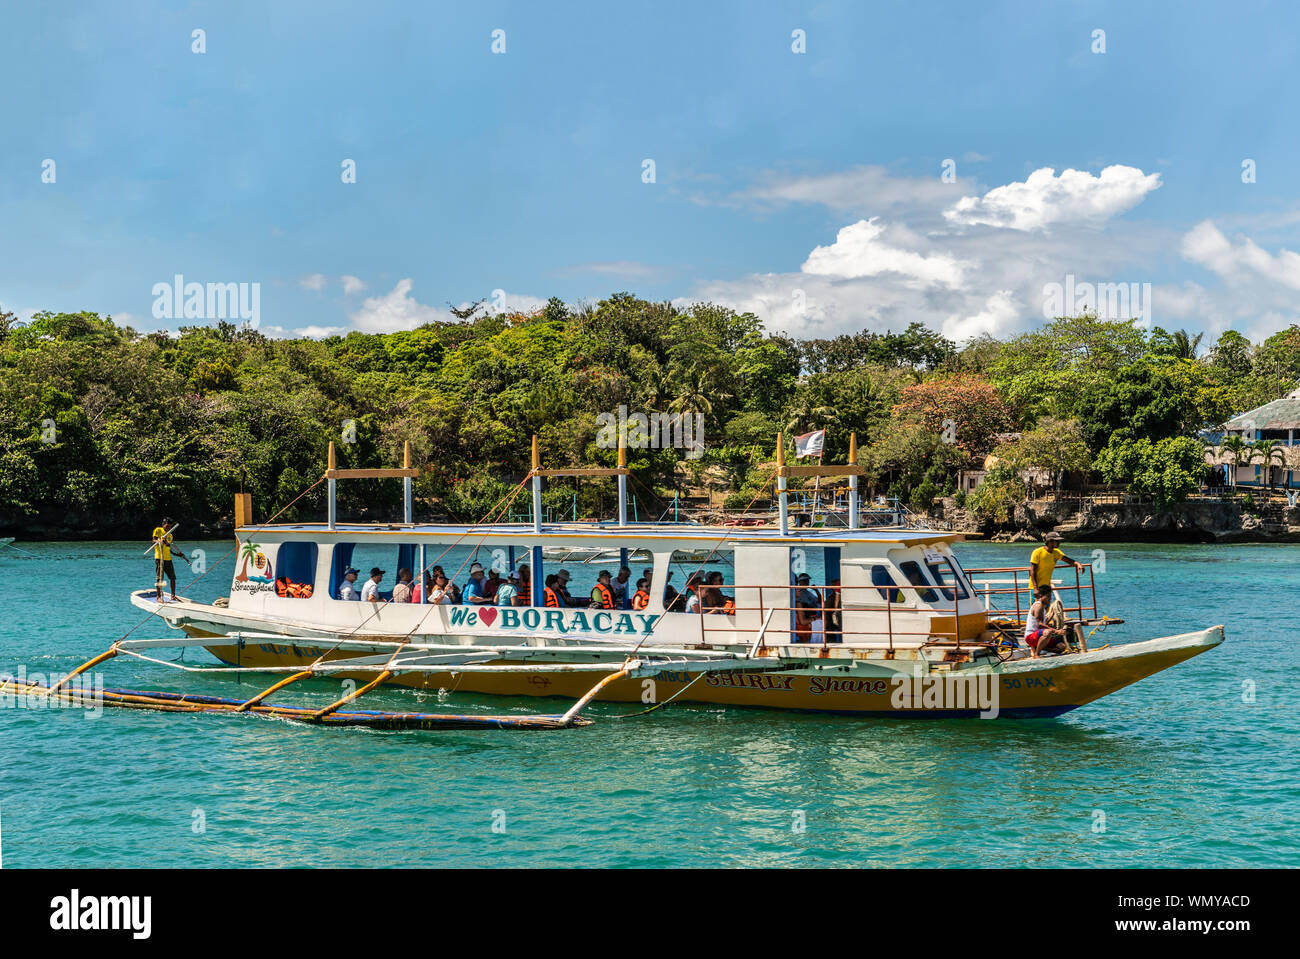 Manoc-Manoc, Boracay, Philippines - March 4, 2019: Closeup of white outrigger ferry on azure sea under blue sky with cloudscape and green tree band on Stock Photo